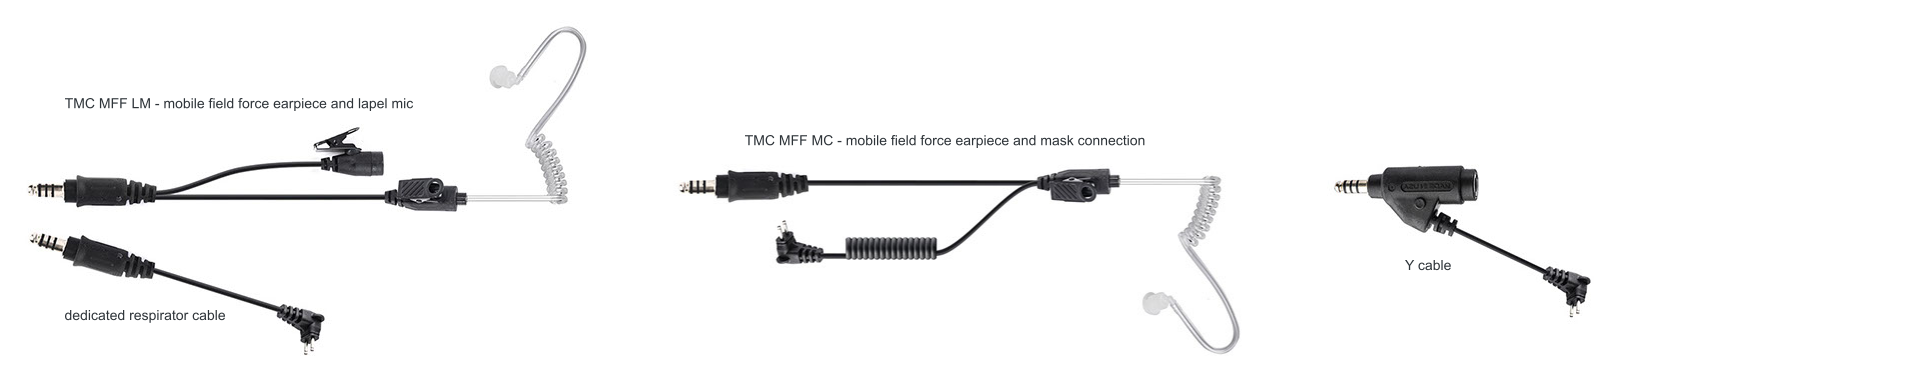 TMC tactical communications system cables